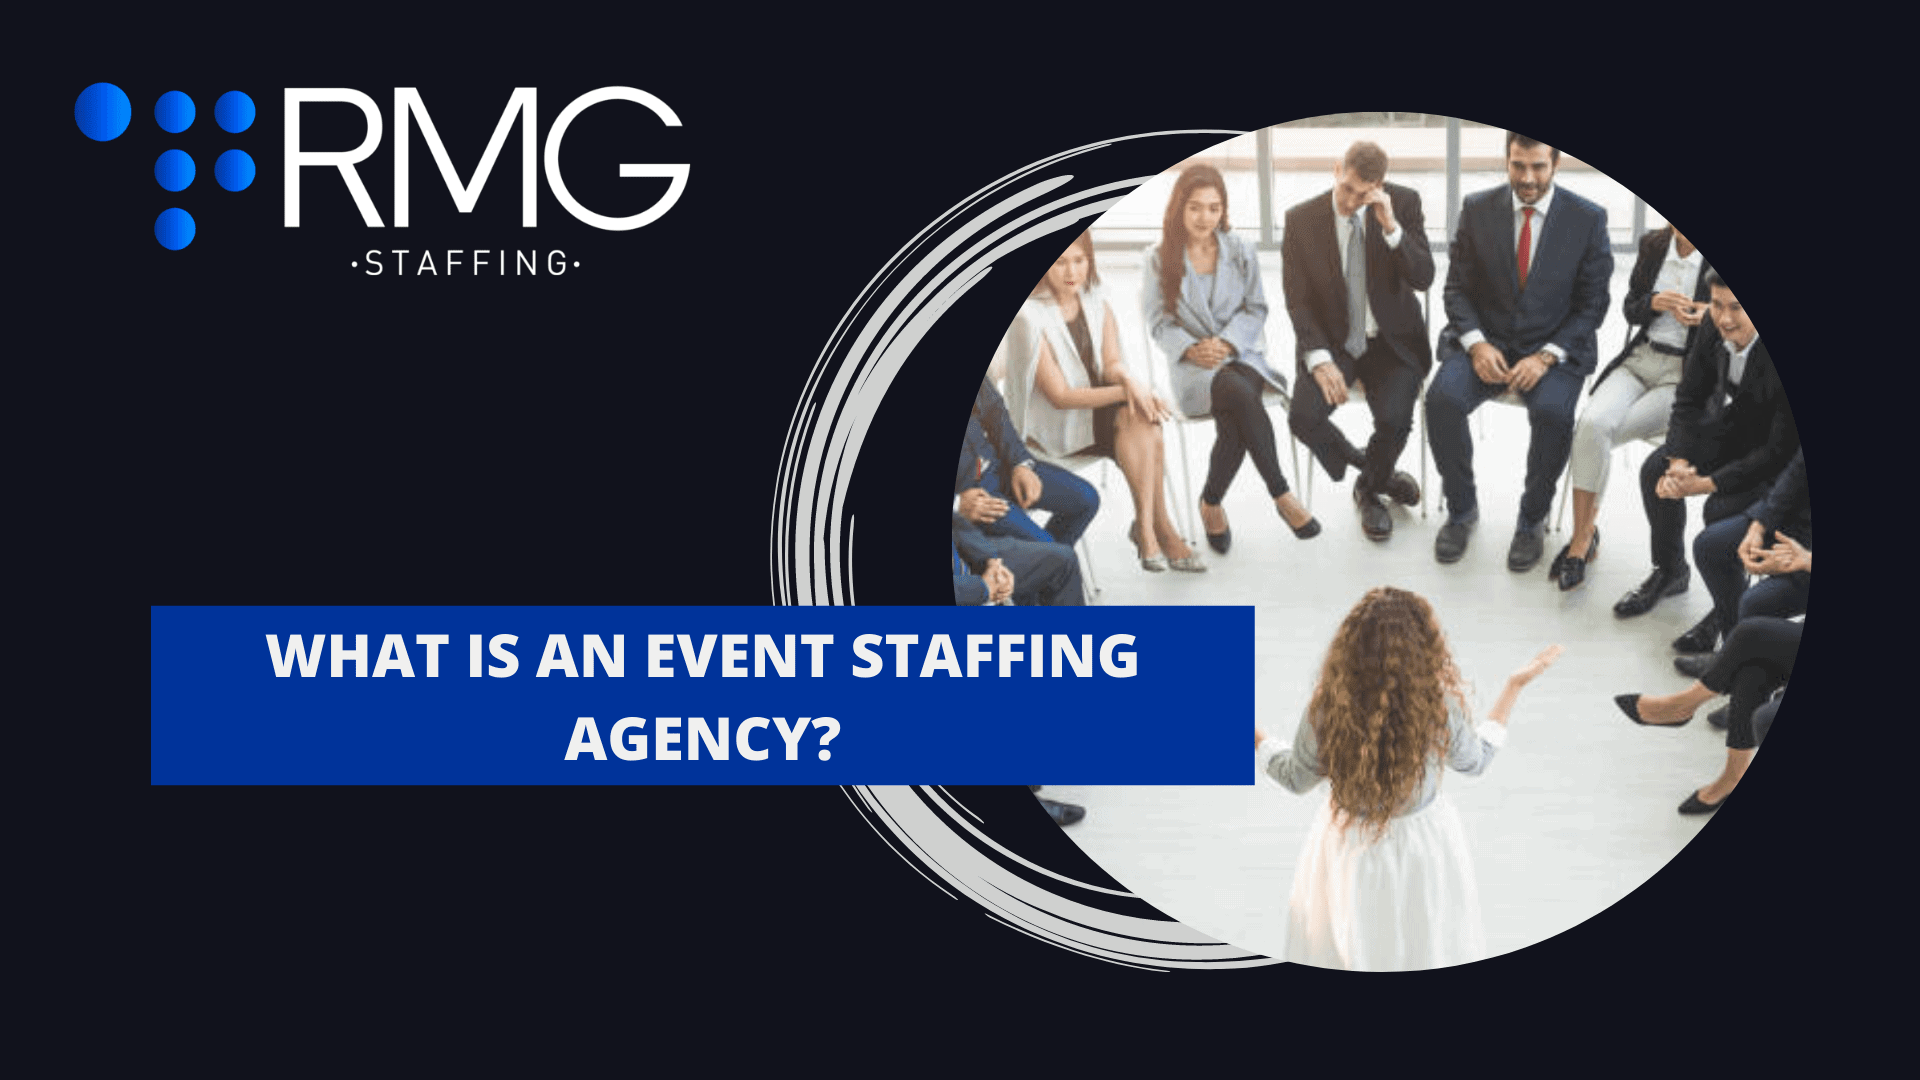 This is an explanation for what is an event staffing agency.